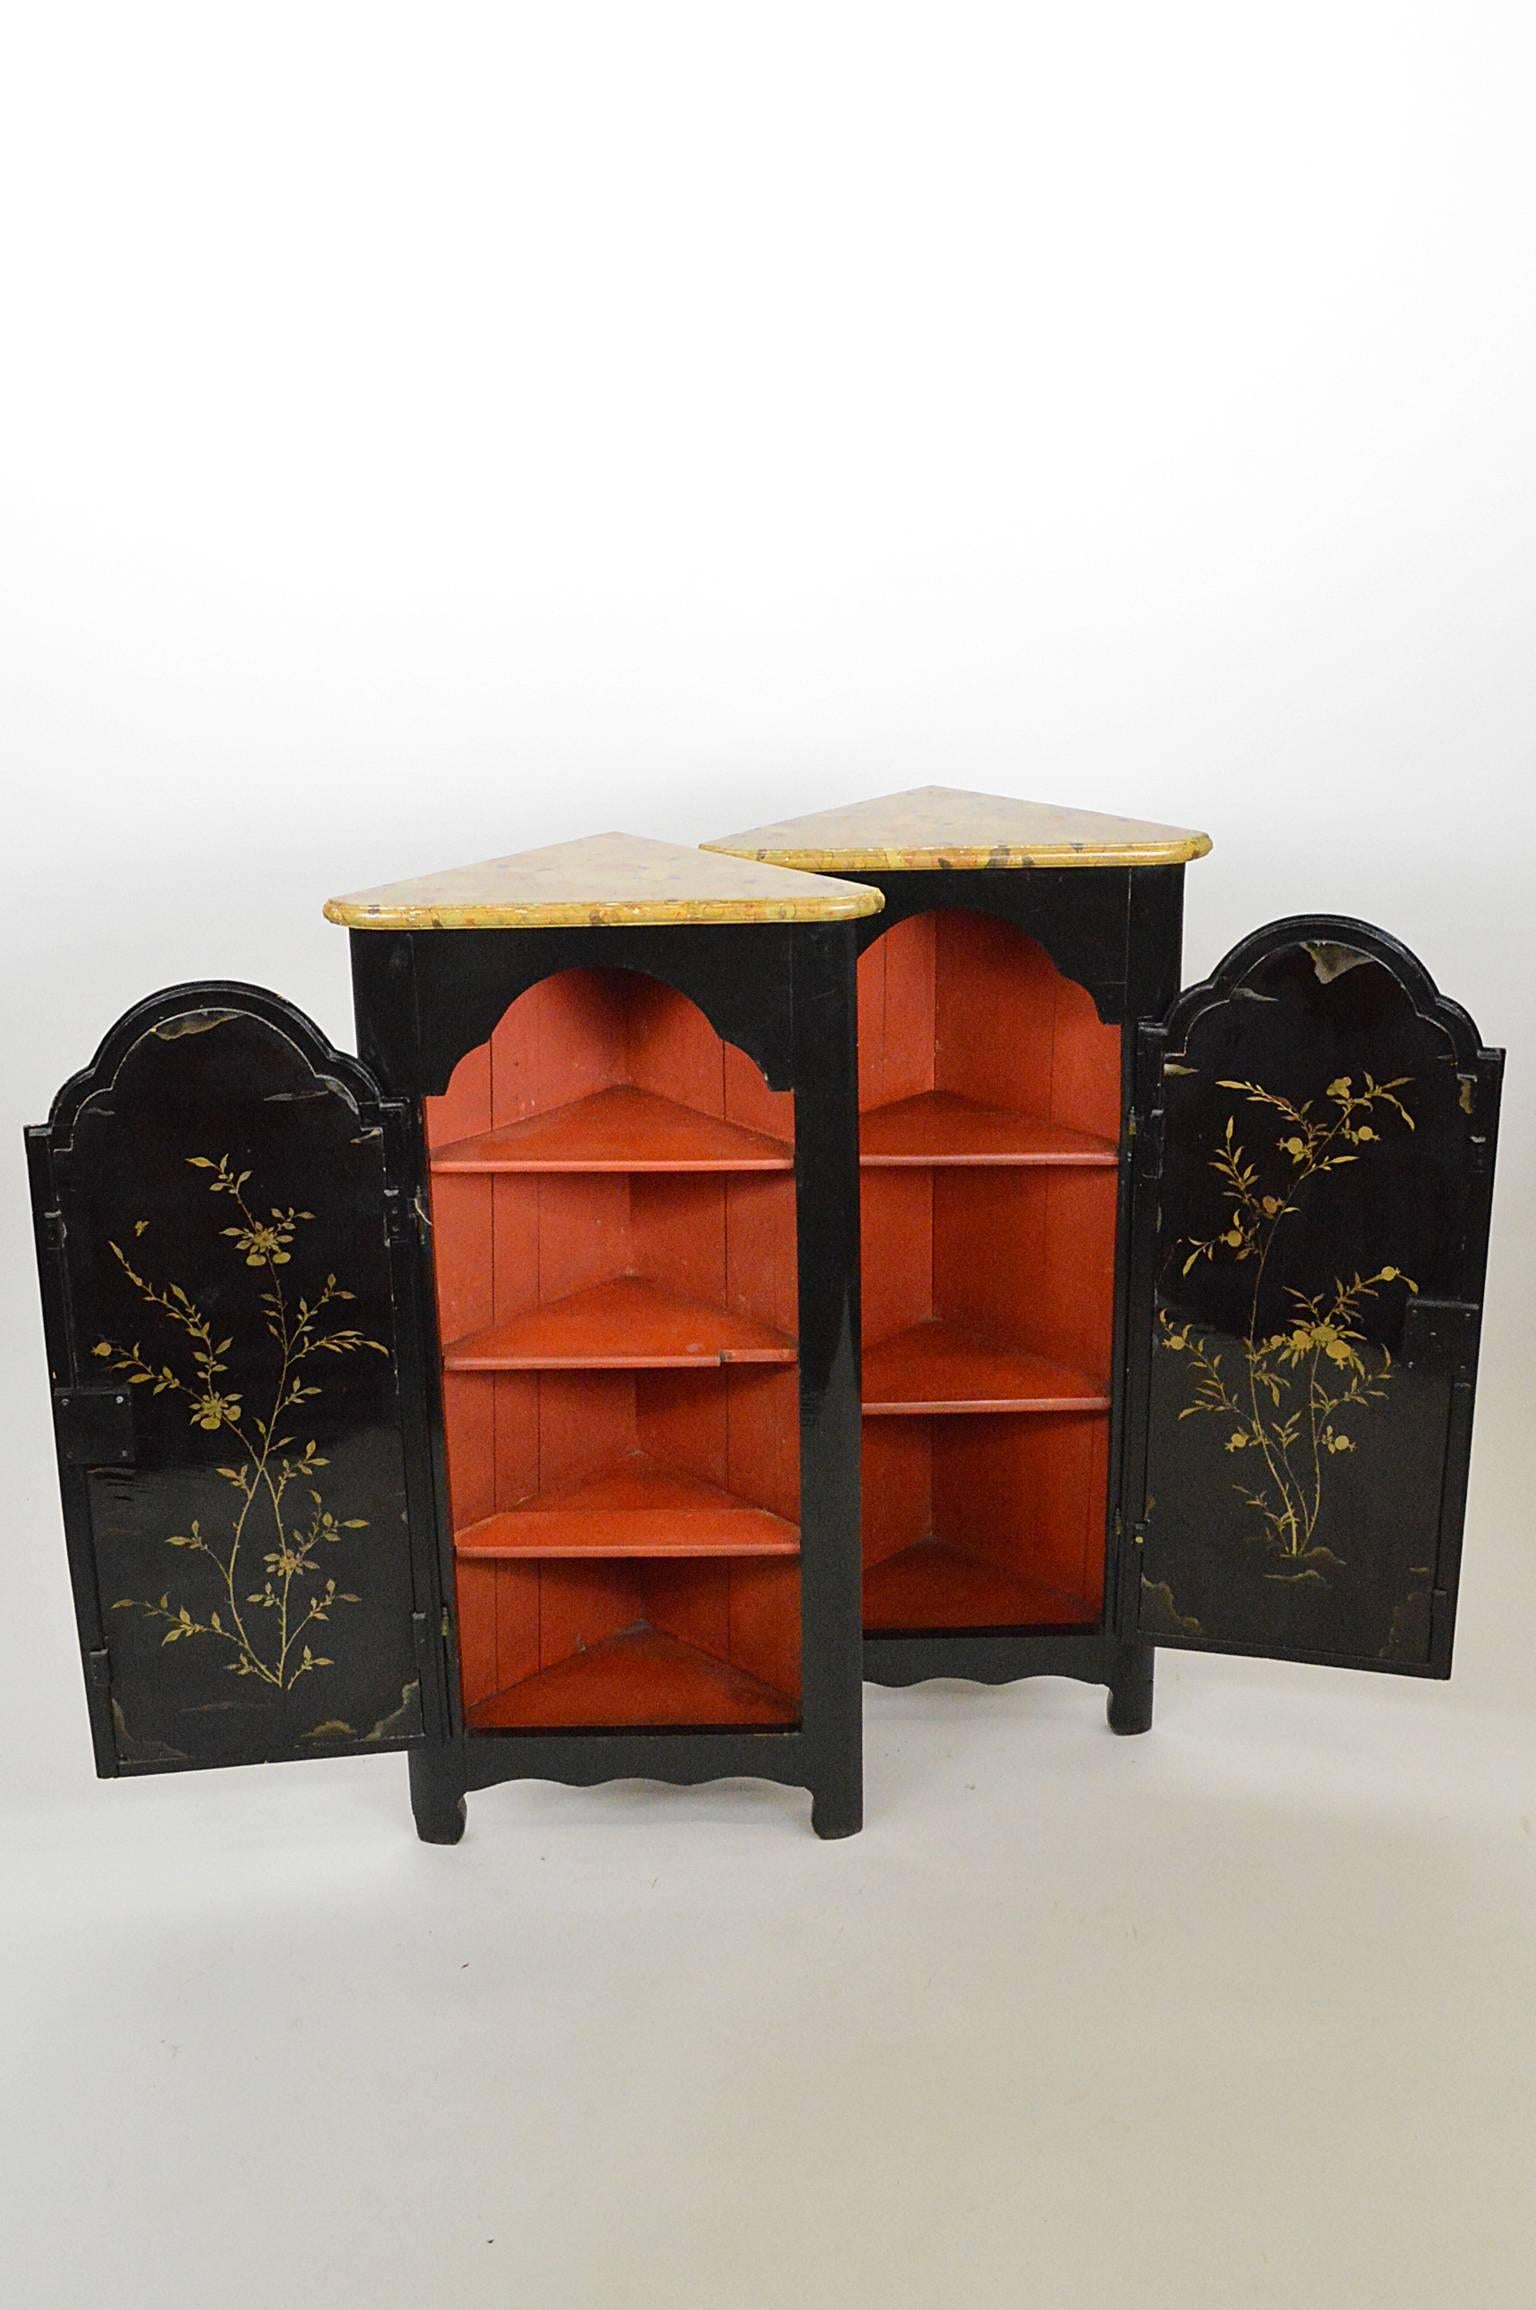 Pair of 19th century English chinoiserie corner cabinets with faux siena marble tops.